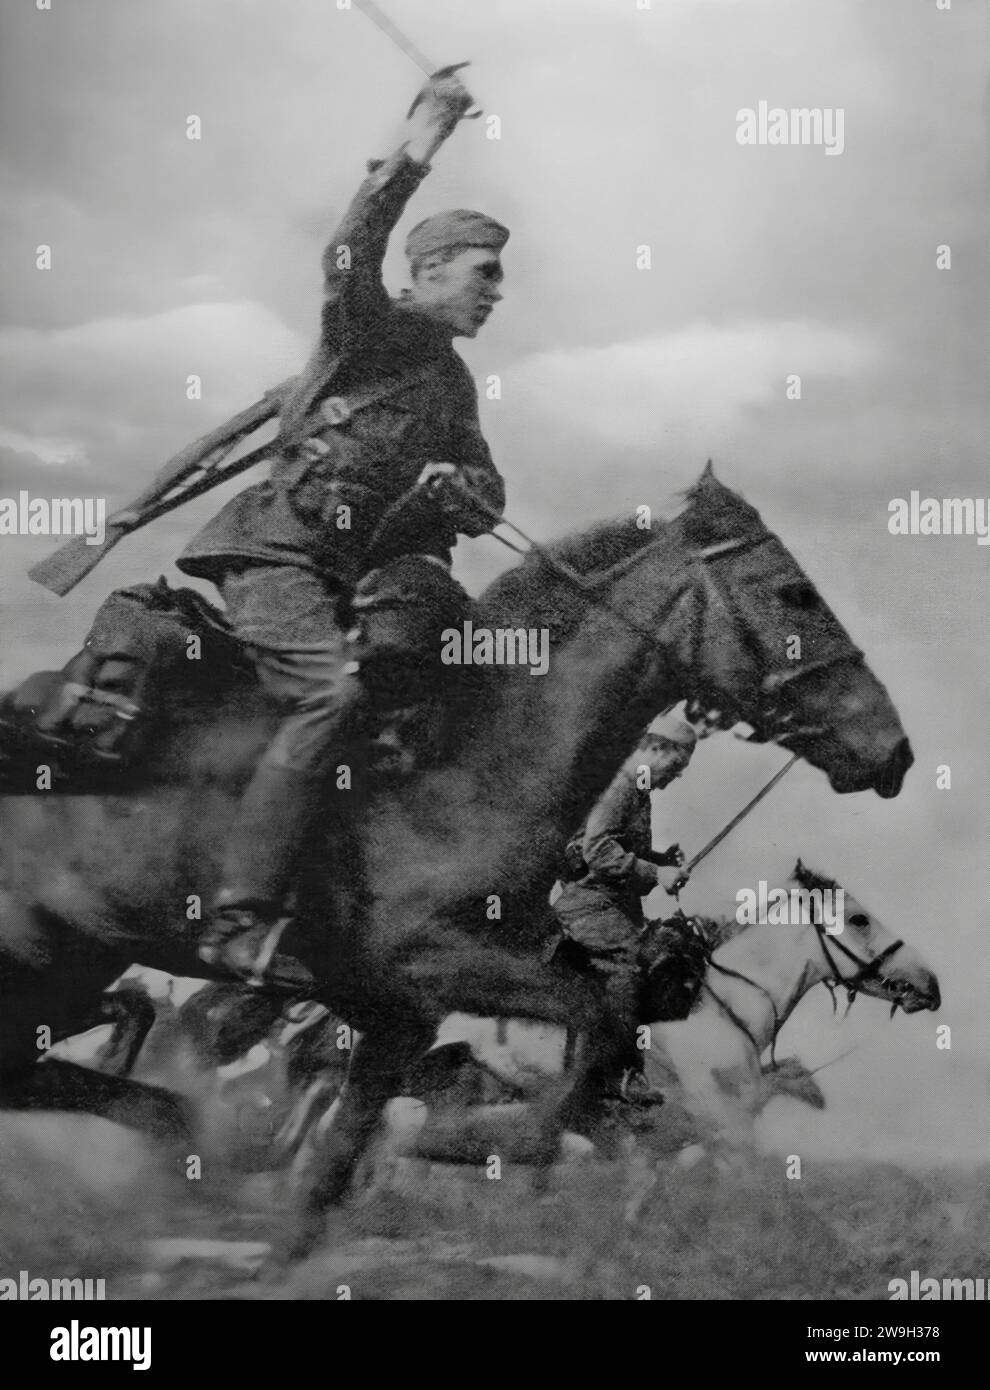 Cossack soldiers on horseback attack German positions during Operation Kutuzov, World War II counter-offensives launched on 12 July 1943 by the Red Army as part of the Kursk Strategic Offensive Operation against Army Group Center of the German Heer. The Operation  ended on 18 August 1943 with the capture of Orel, the administrative center of Oryol Oblast, Russia. Stock Photo